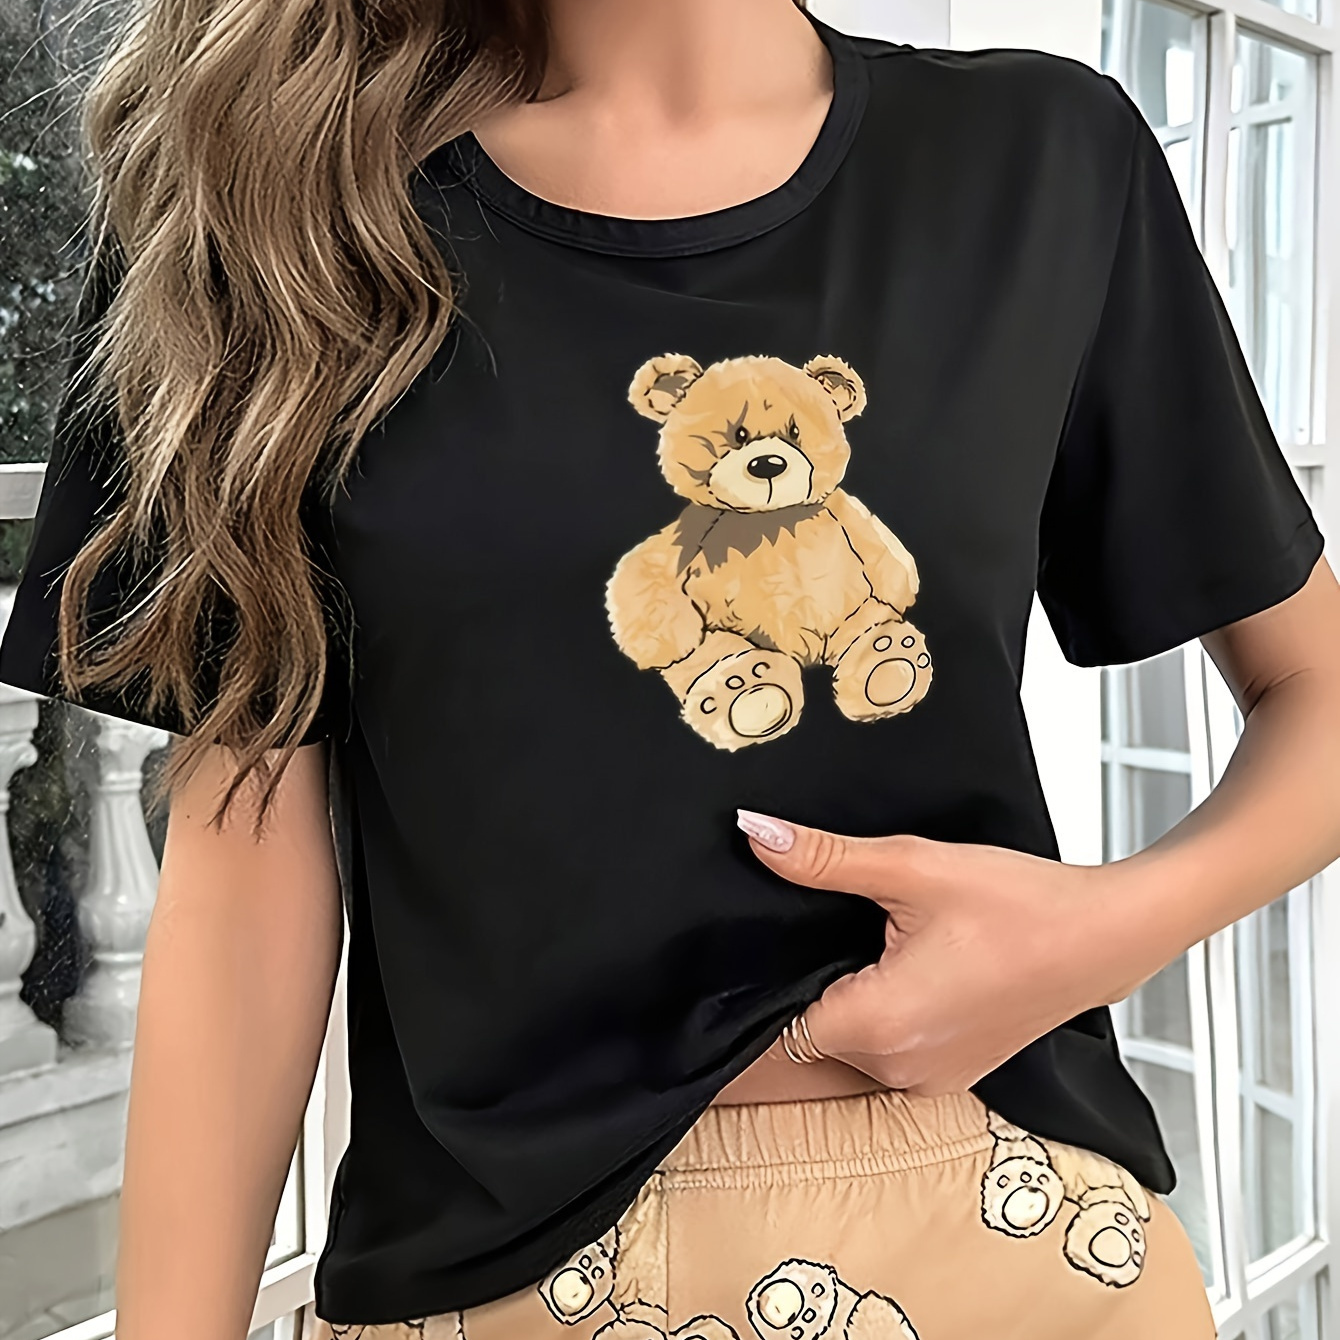 

Women's Cute Cartoon Bear Graphic T-shirt, Casual Short Sleeve Round Neck Tee, Relaxed Fit Top For Daily Wear